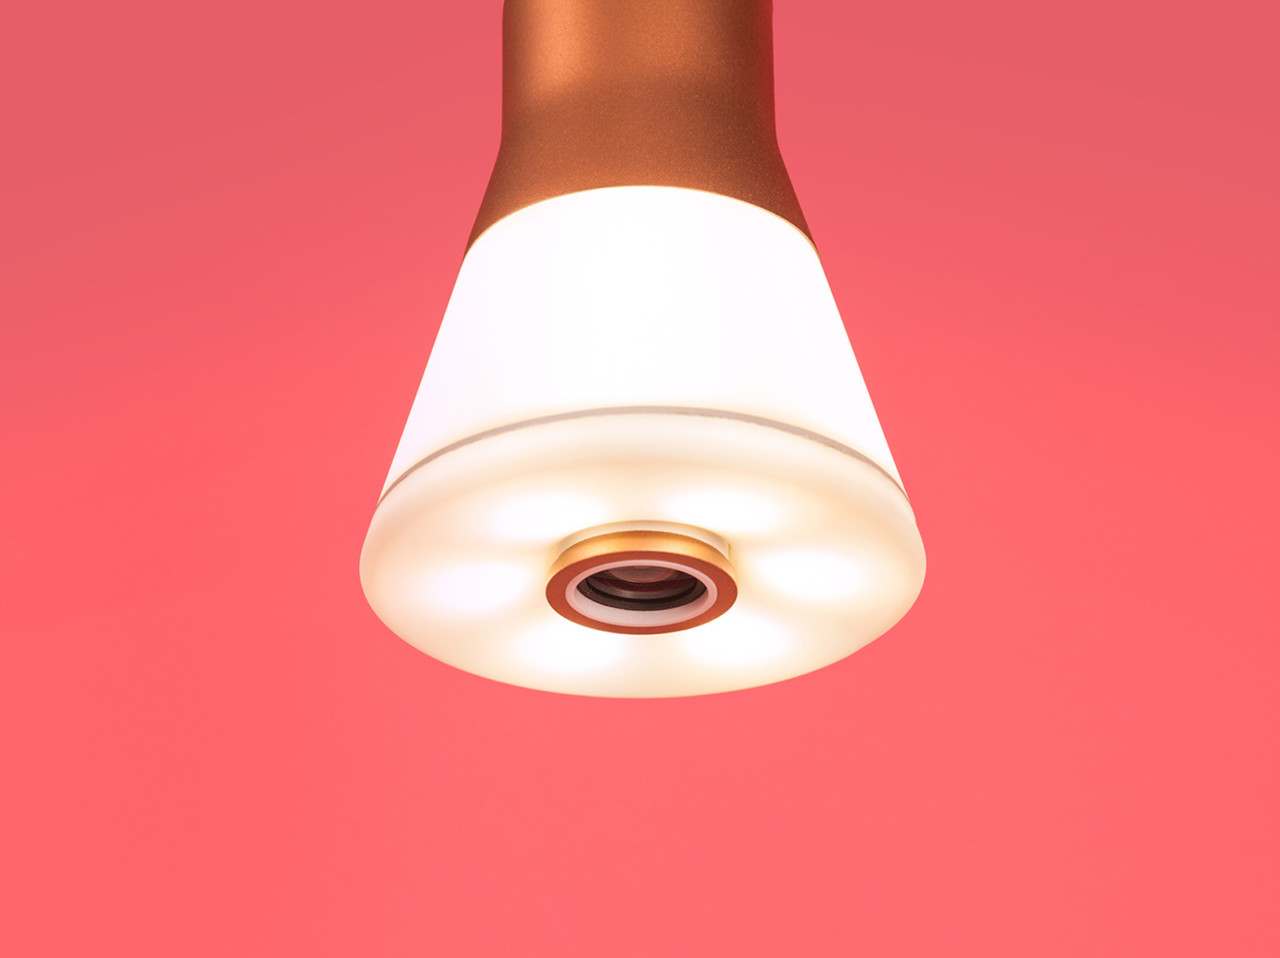 Filo Modular LED Light Bulb Lets Your Plug In Features